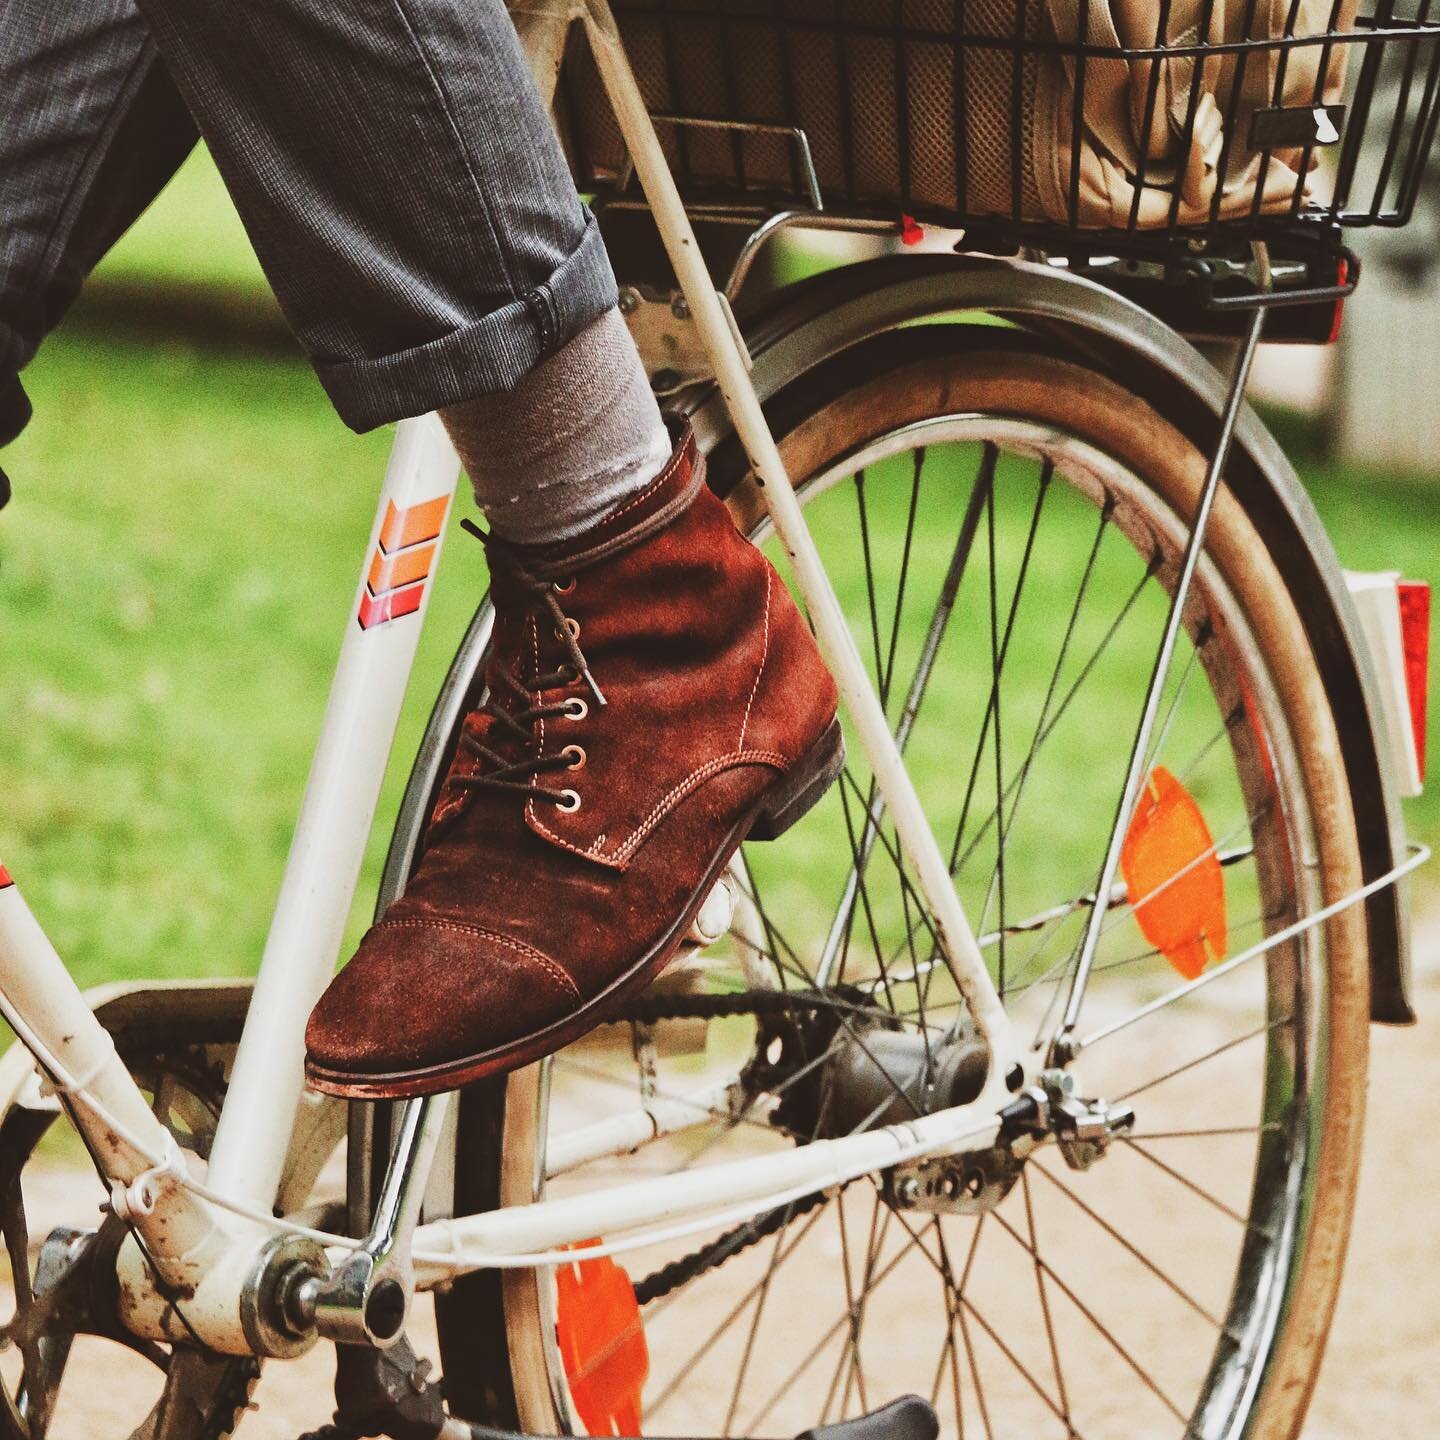 If it's possible, bike to work! While not every job is on location and not every day is the same weather forecast, biking to work has so many benefits. Here are the top 10 benefits of biking to work:

1. Save money.
2. Get fit.
3. Avoid traffic.
4. G